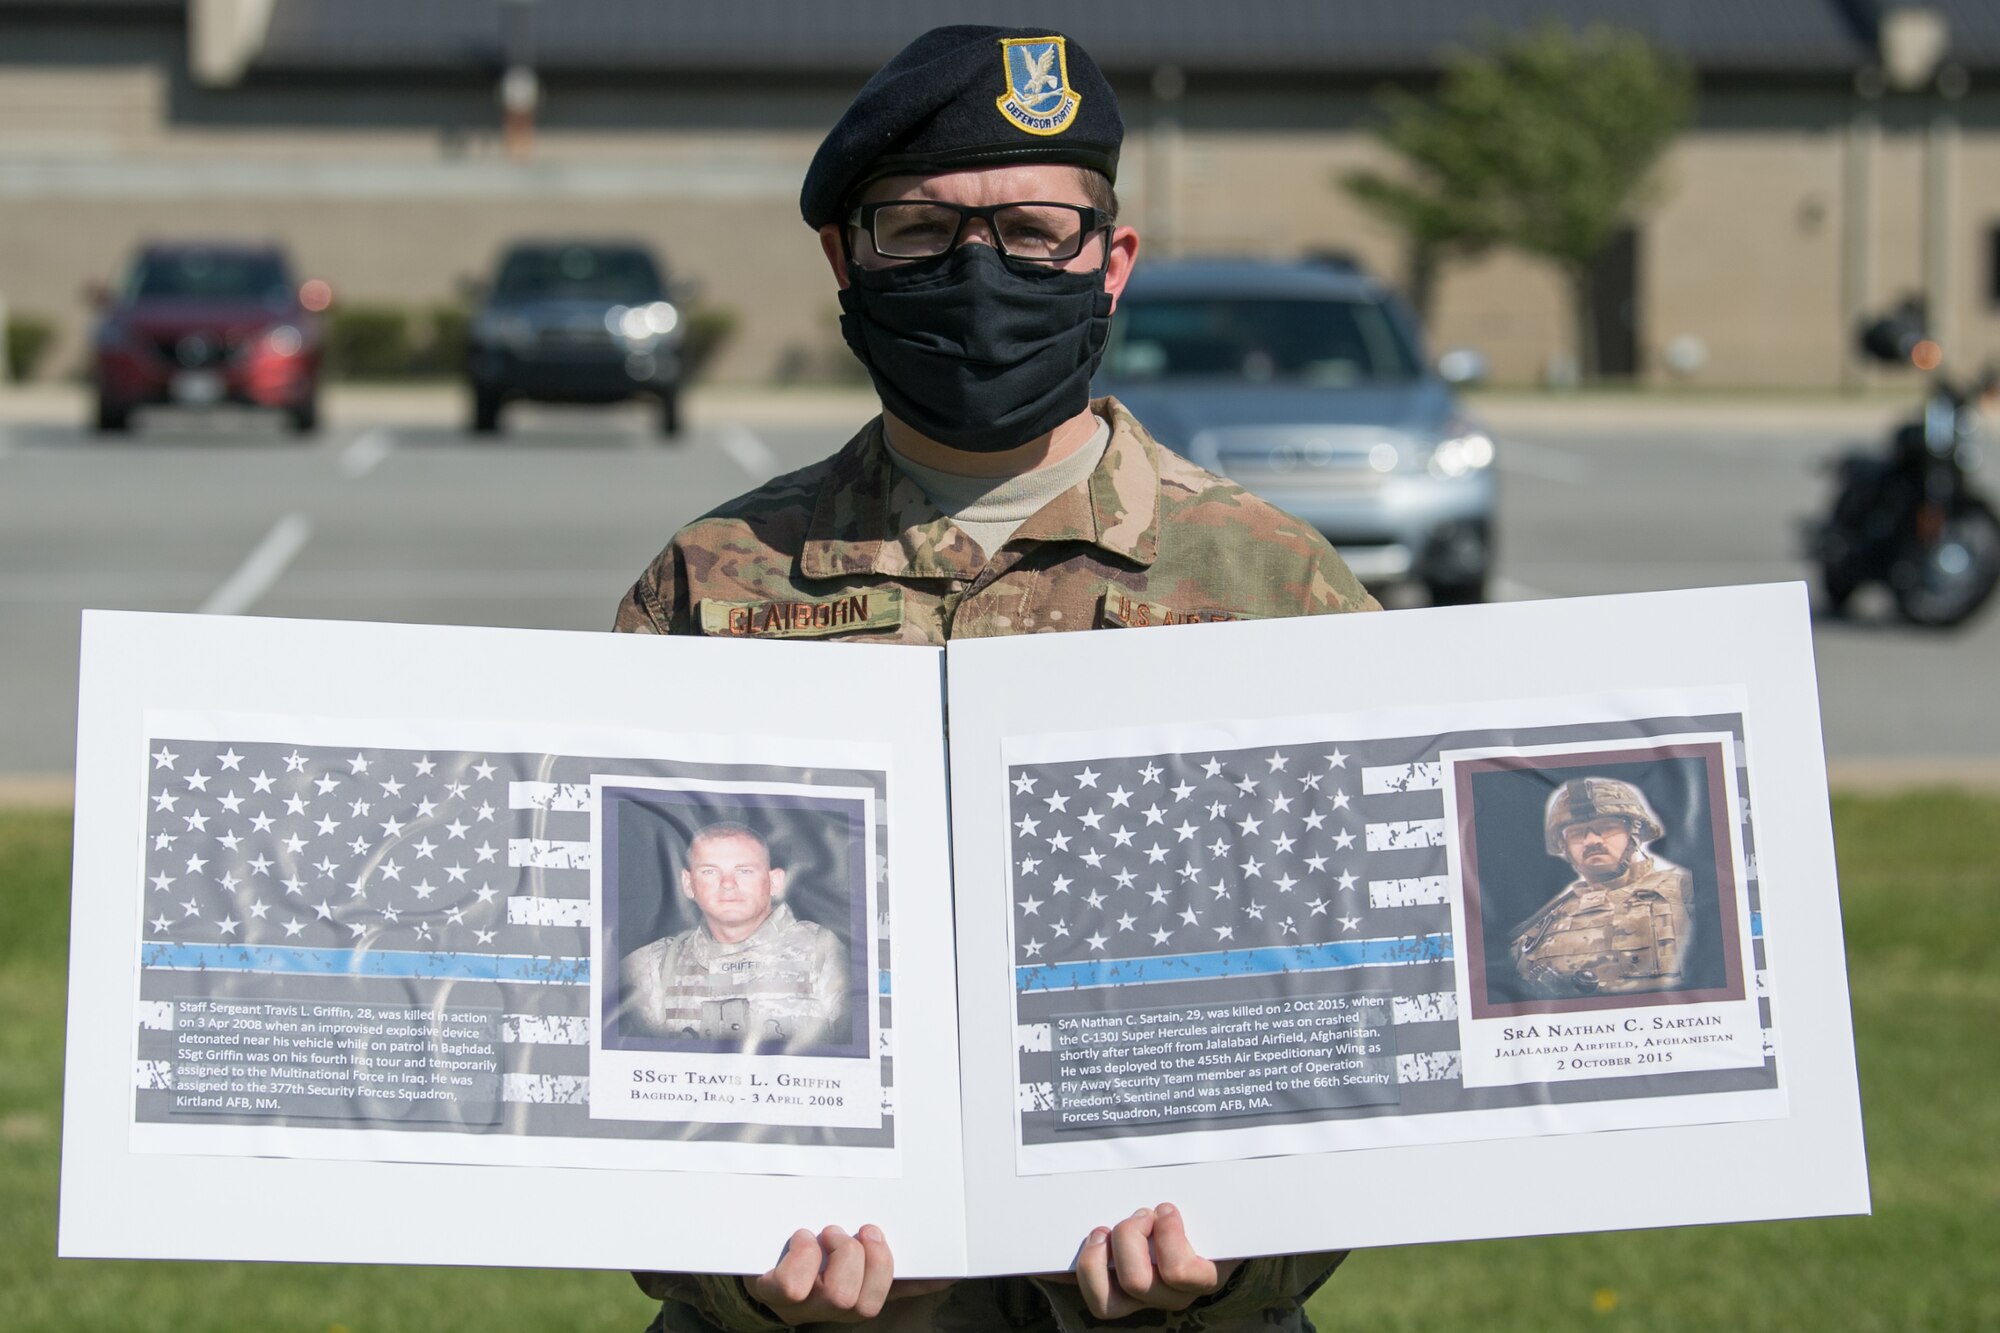 Senior Airman Ryan Claiborn, 436th Security Forces Squadron installation patrolman, holds photos of two fallen defenders during a retreat ceremony on Peace Officers Memorial Day May 15, 2020, at Dover Air Force Base, Delaware. The ceremony commemorating fallen military and civilian law enforcement officers marked the end of National Police Week 2020. (U.S. Air Force photo by Mauricio Campino)